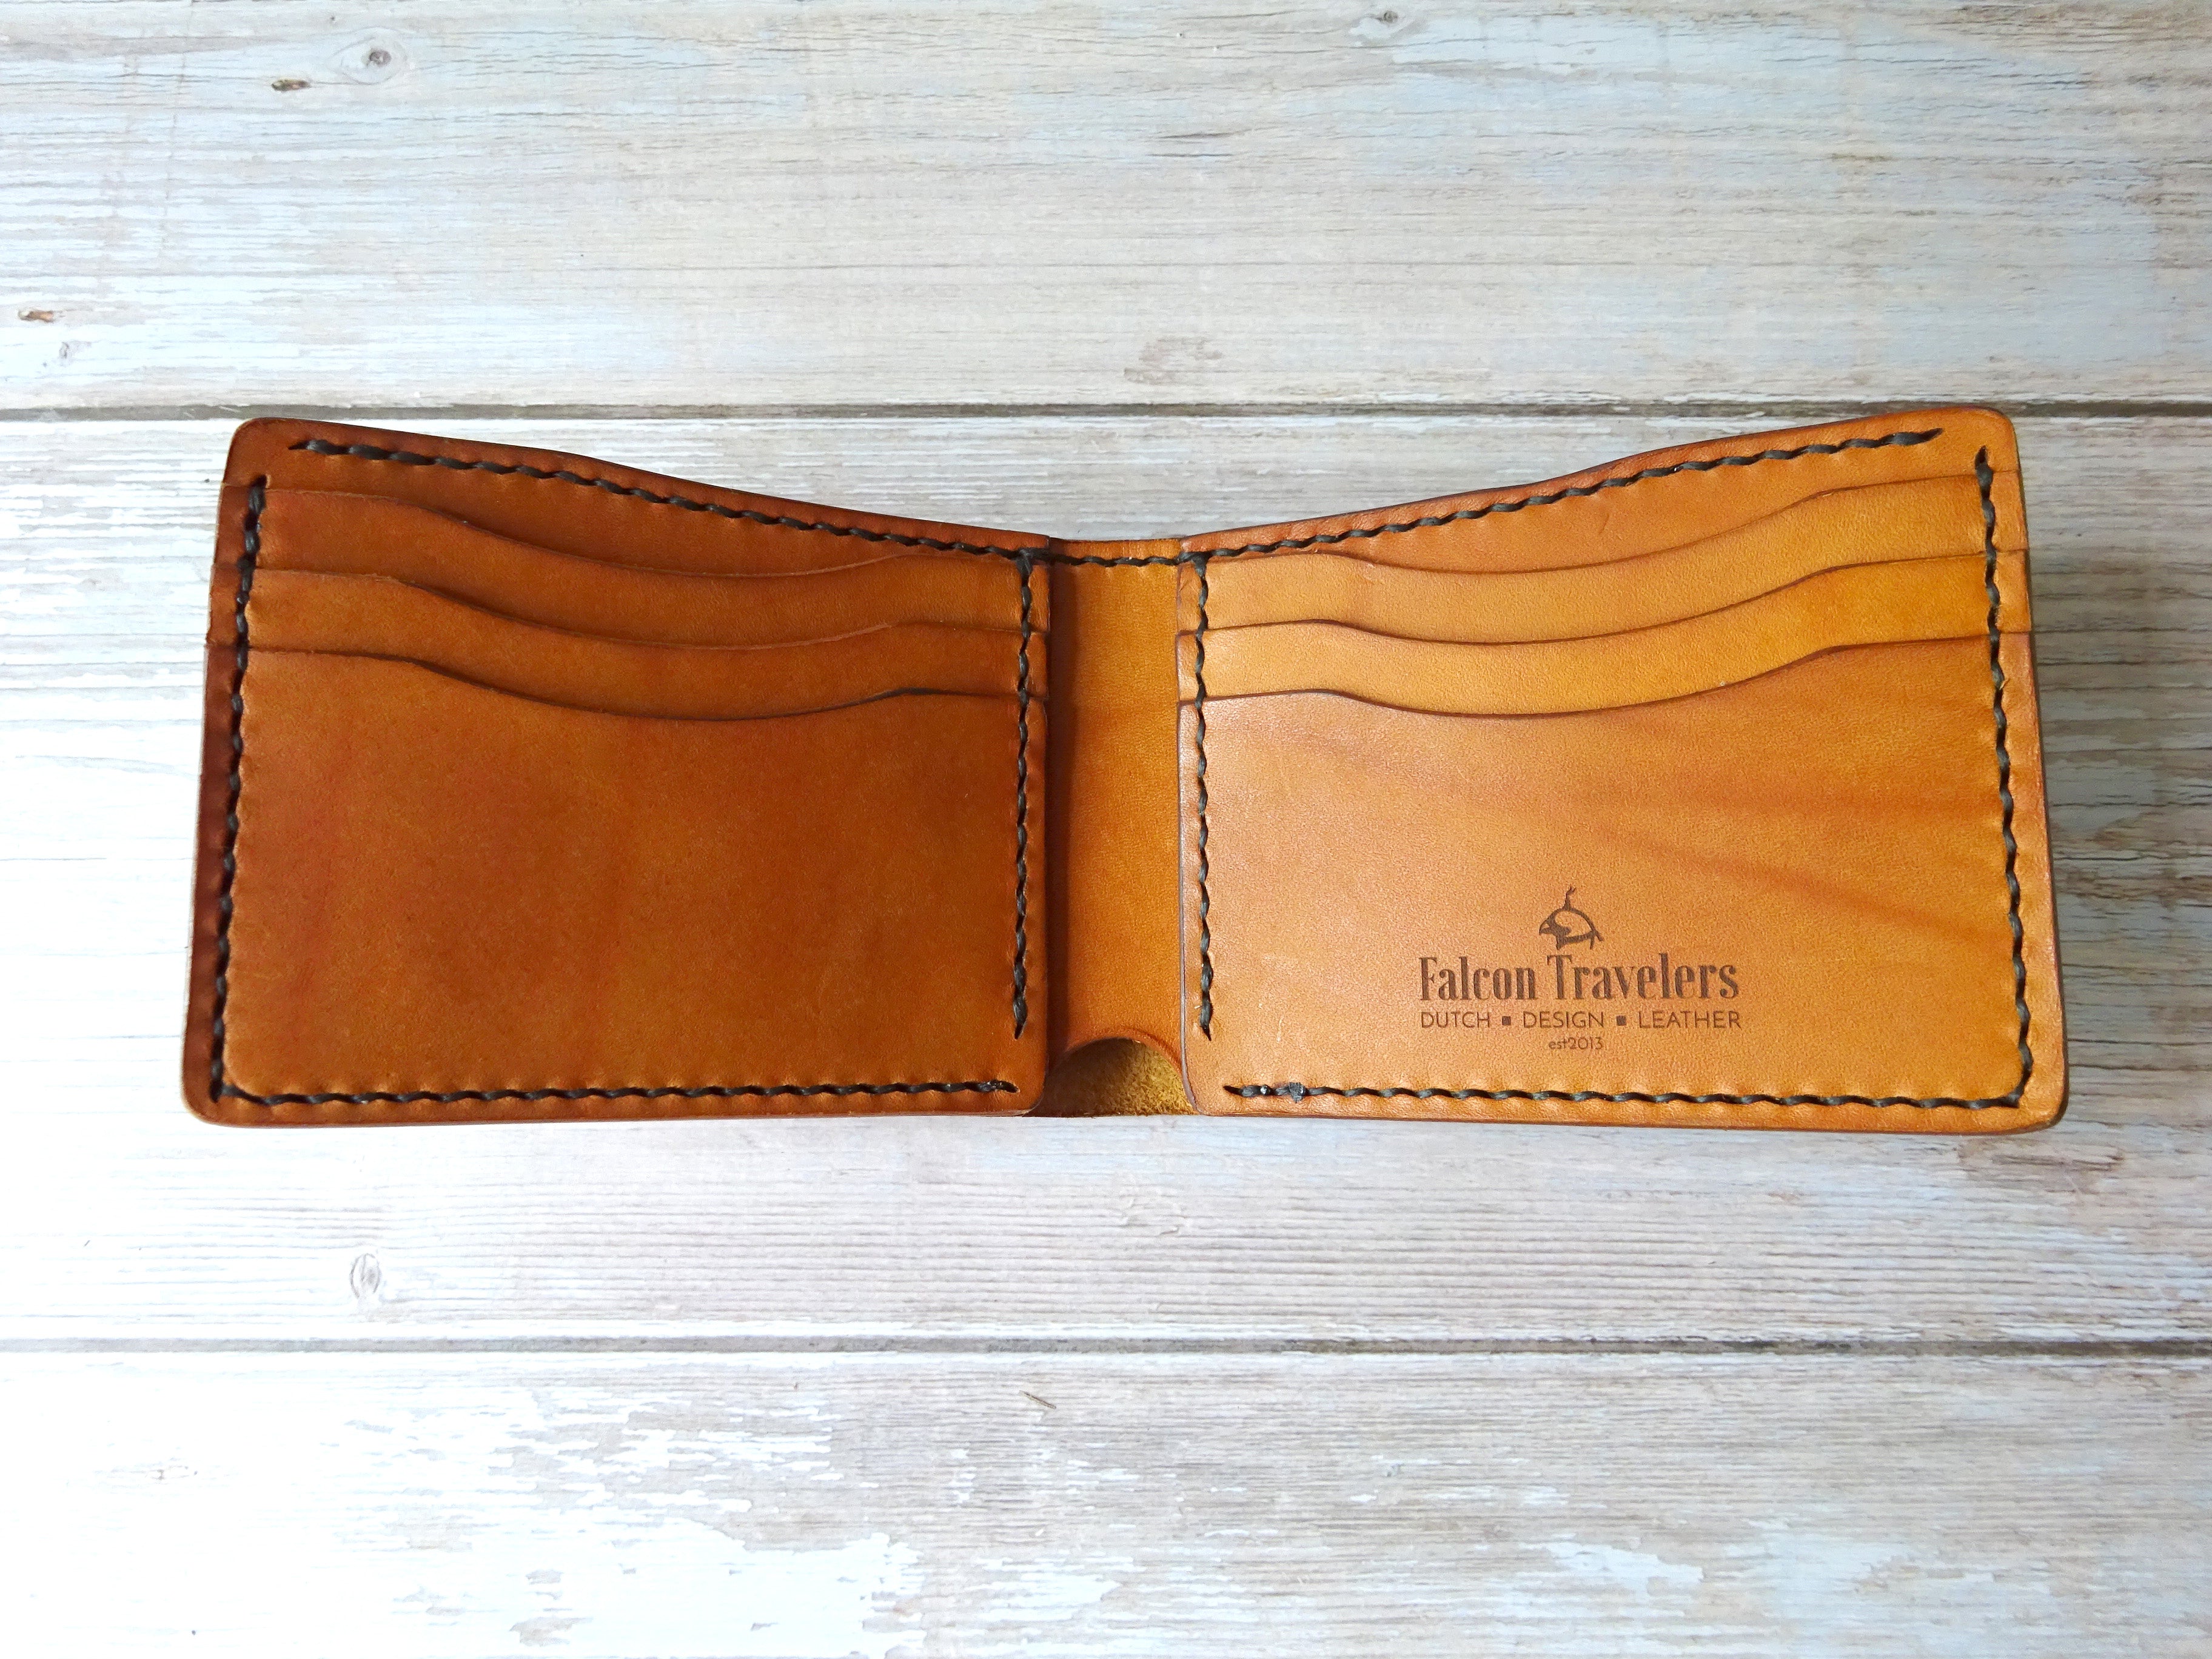 Small Leather Goods - Falcon Travelers